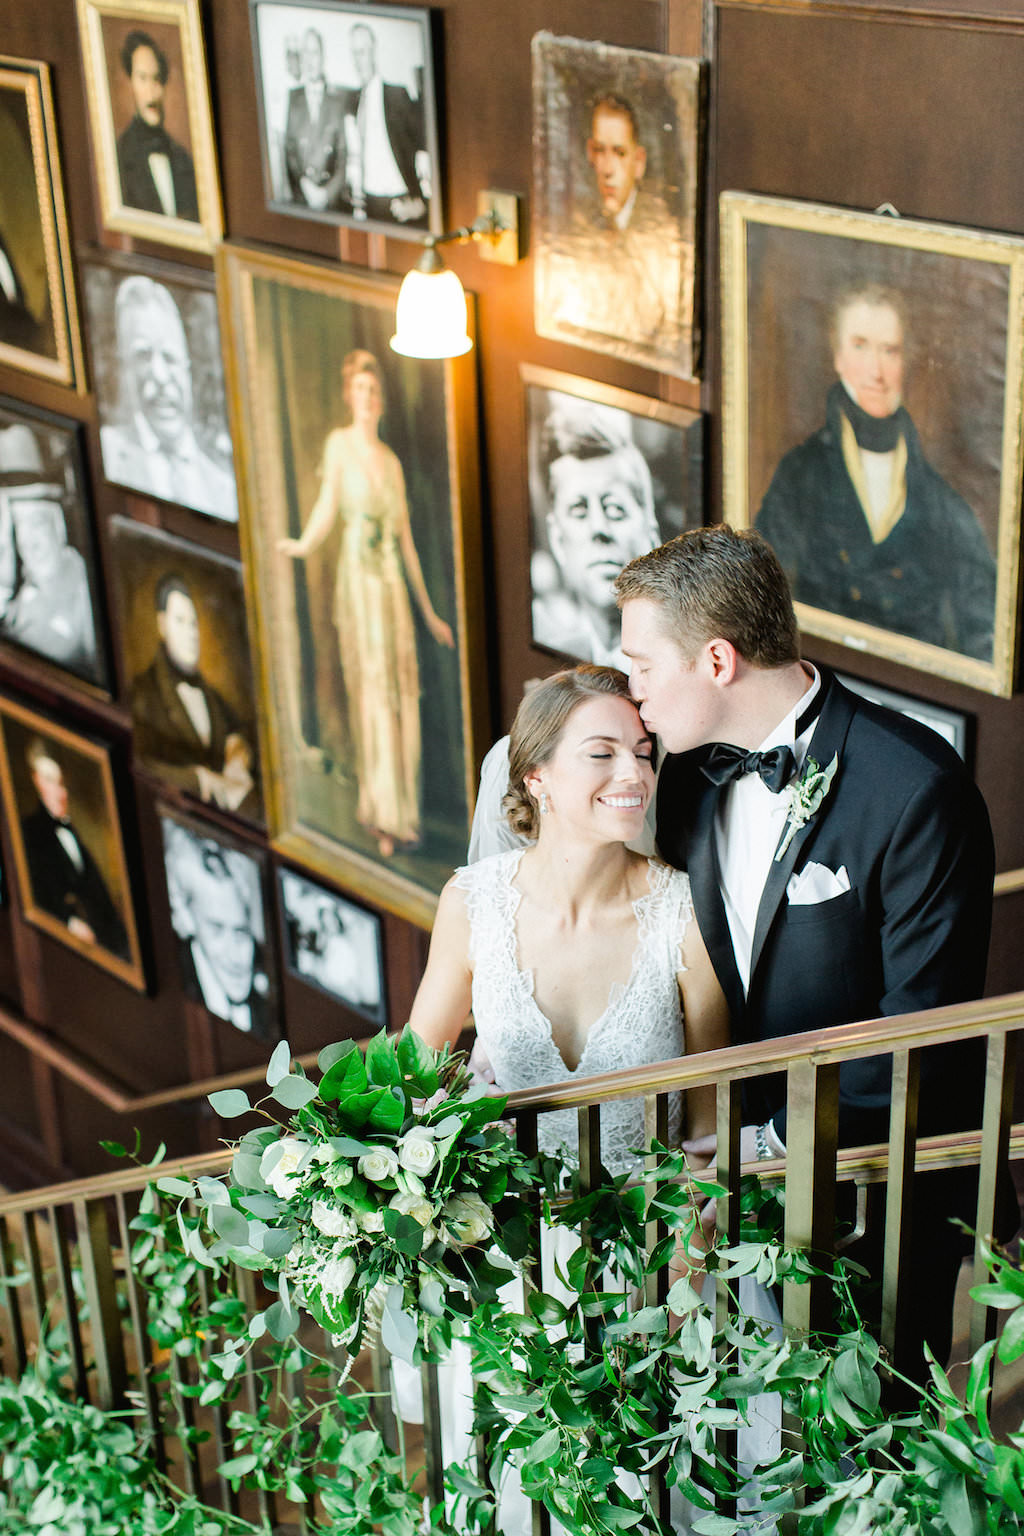 Indoor Wedding Portrait on Staircase with Greenery, Bride in V Neck Dress, Groom in Black Tuxedo | Tampa Wedding Photographer Ailyn La Torre Photography | Downtown Historic Venue The Oxford Exchange